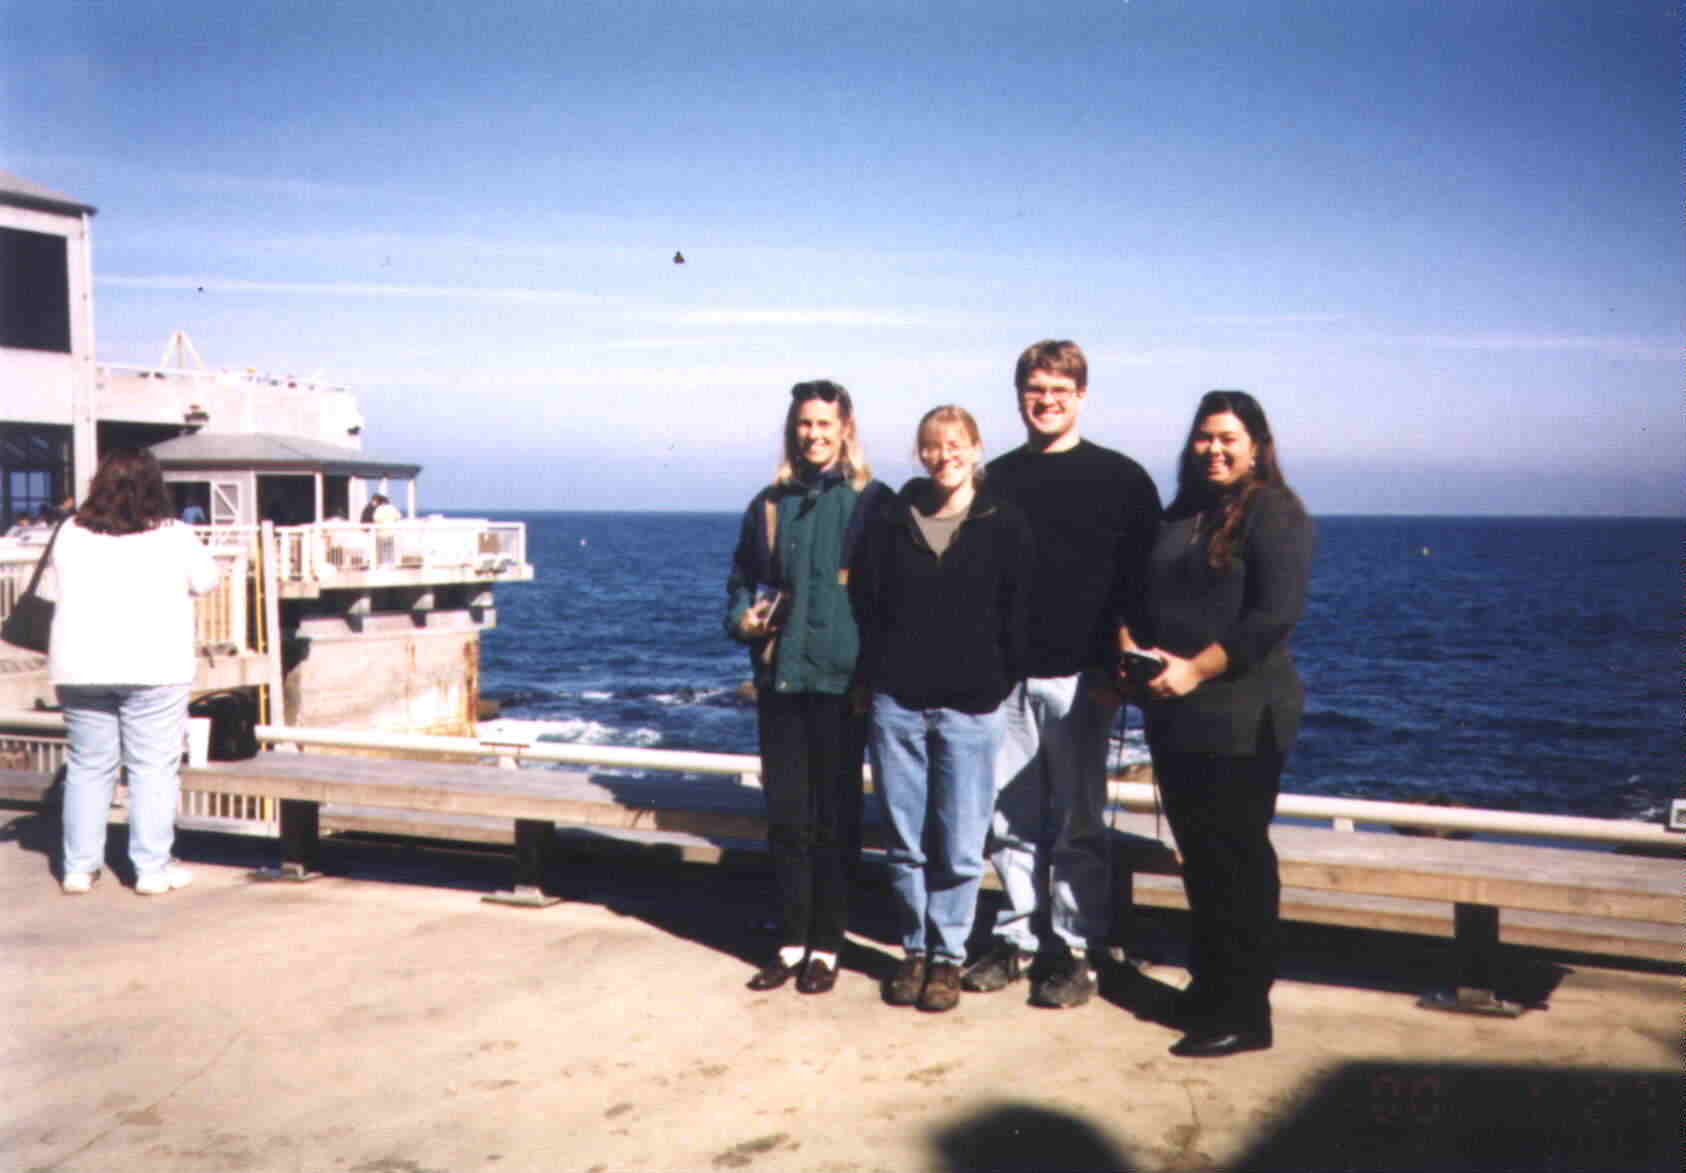 Lucy, Jaime, Phil, and Chandra in Monterey 2000